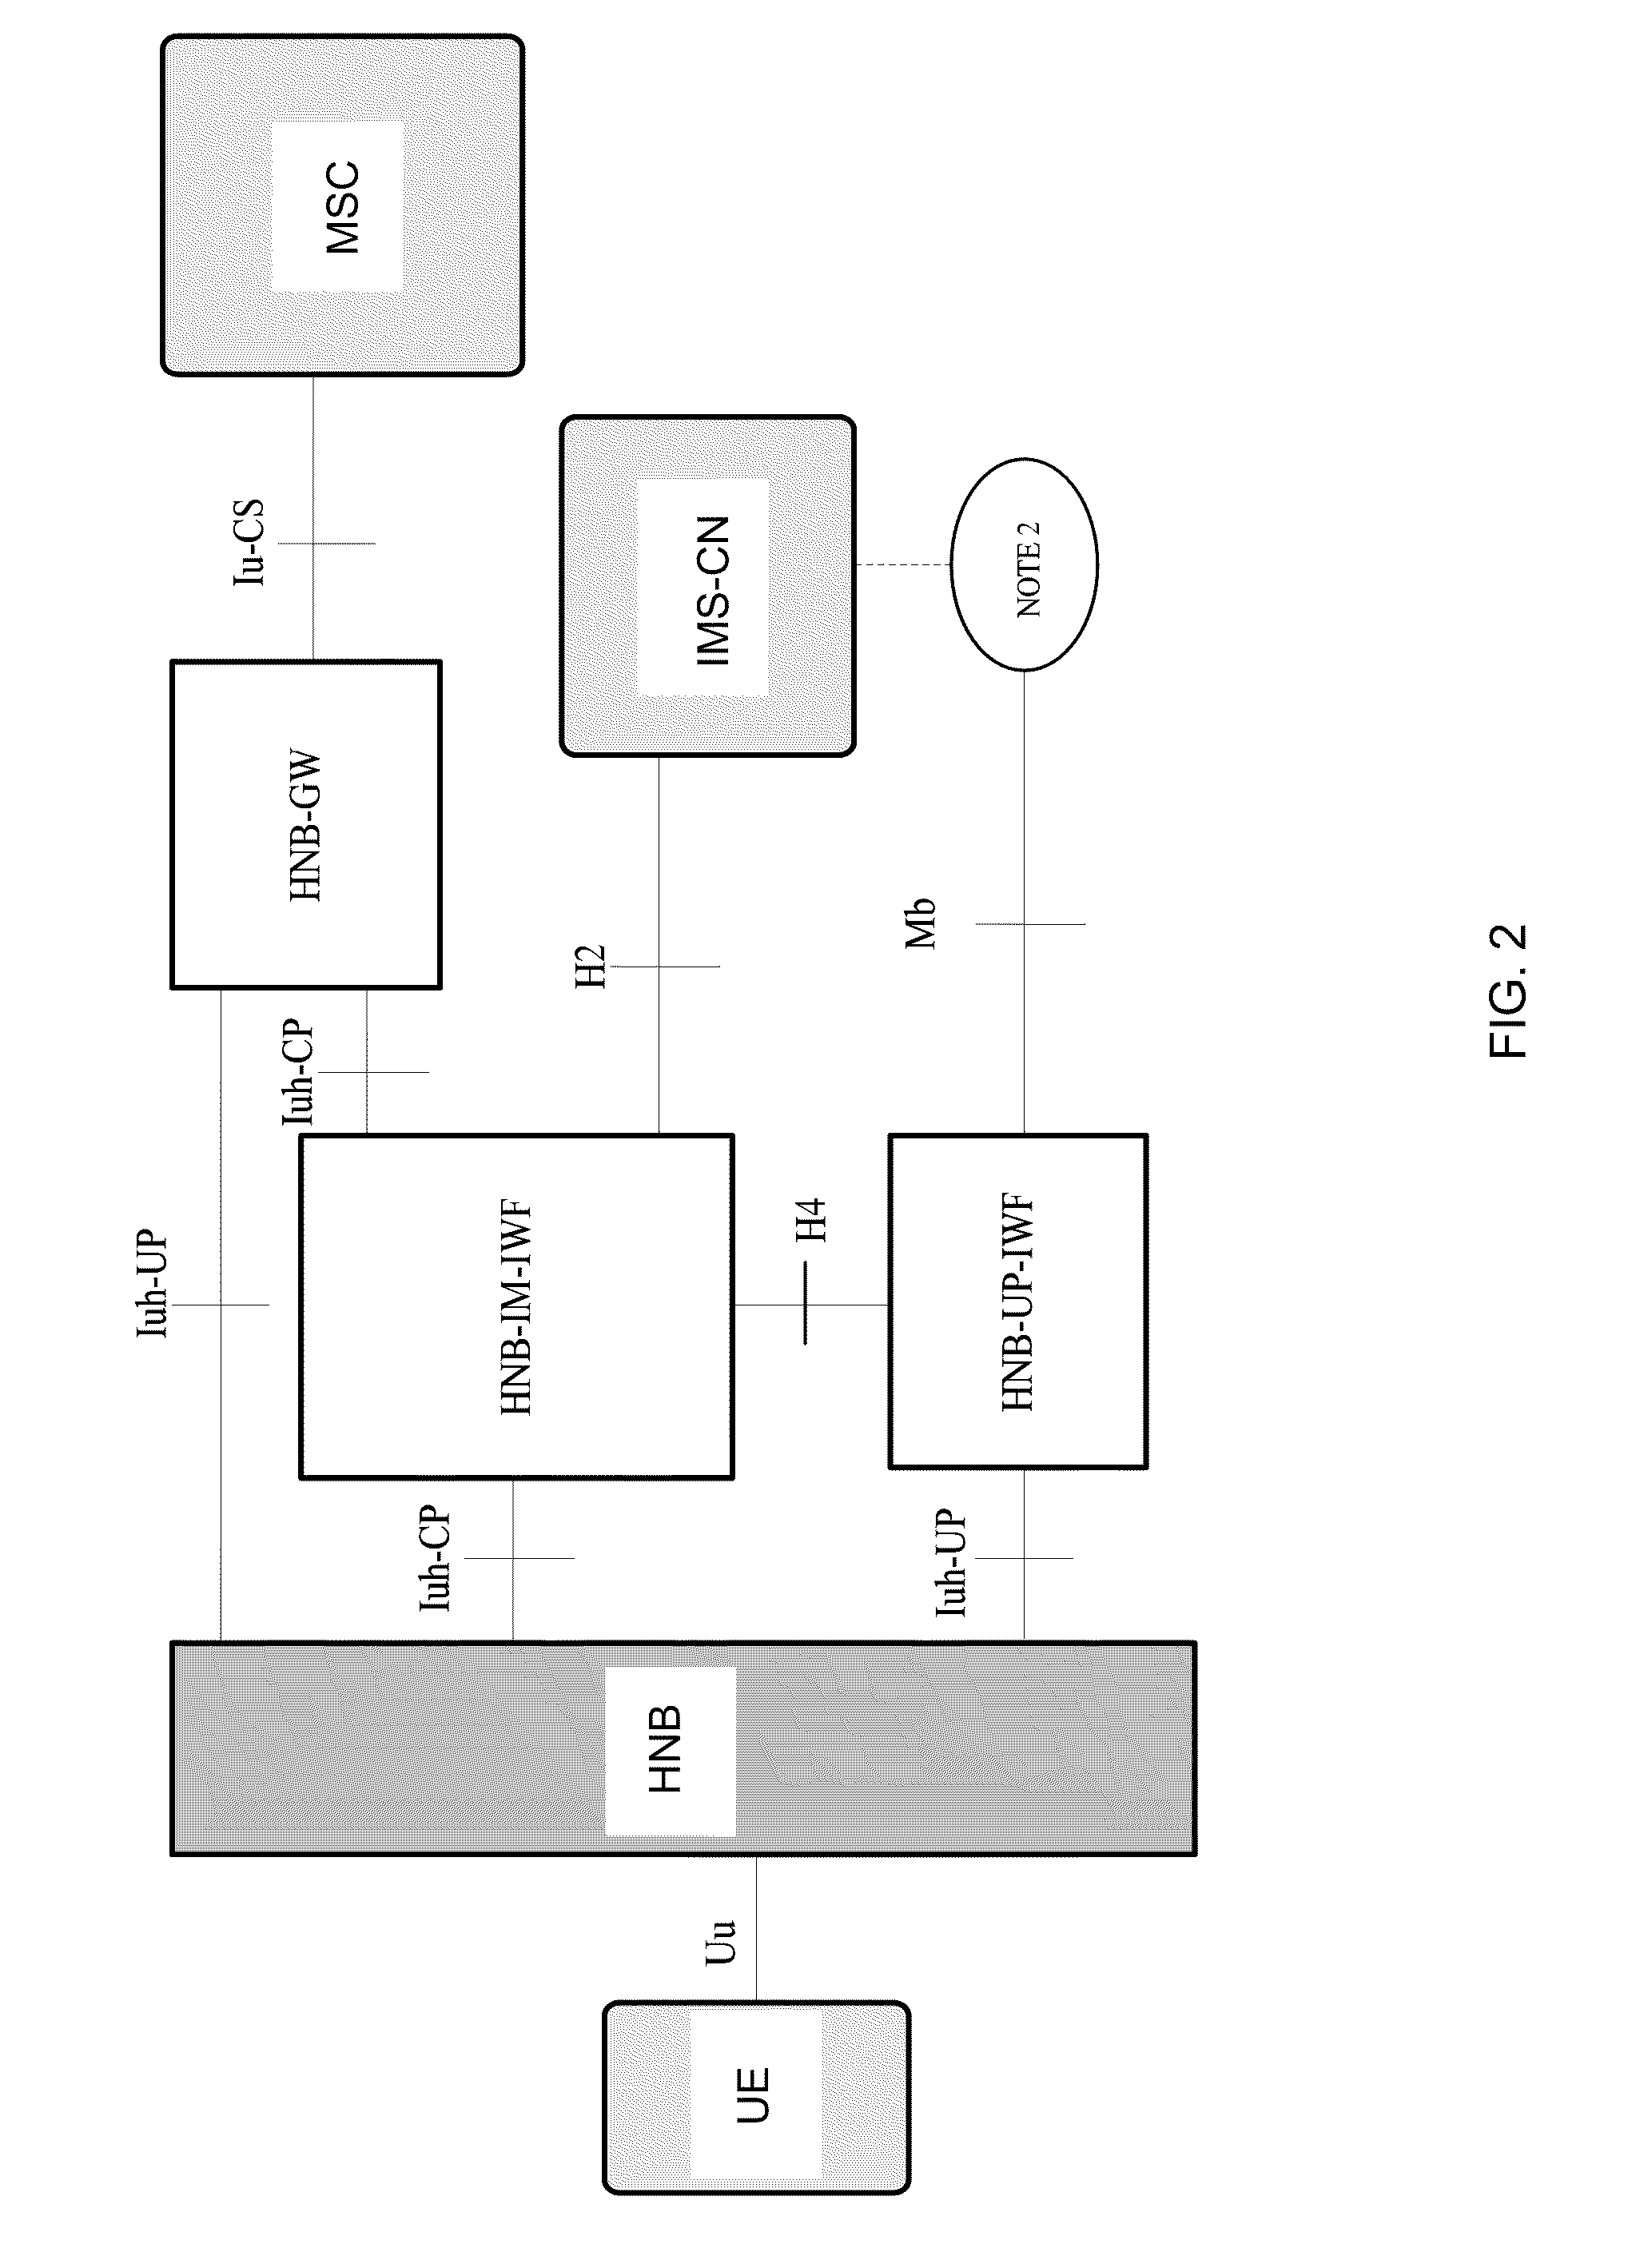 System and method for femto coverage in a wireless network